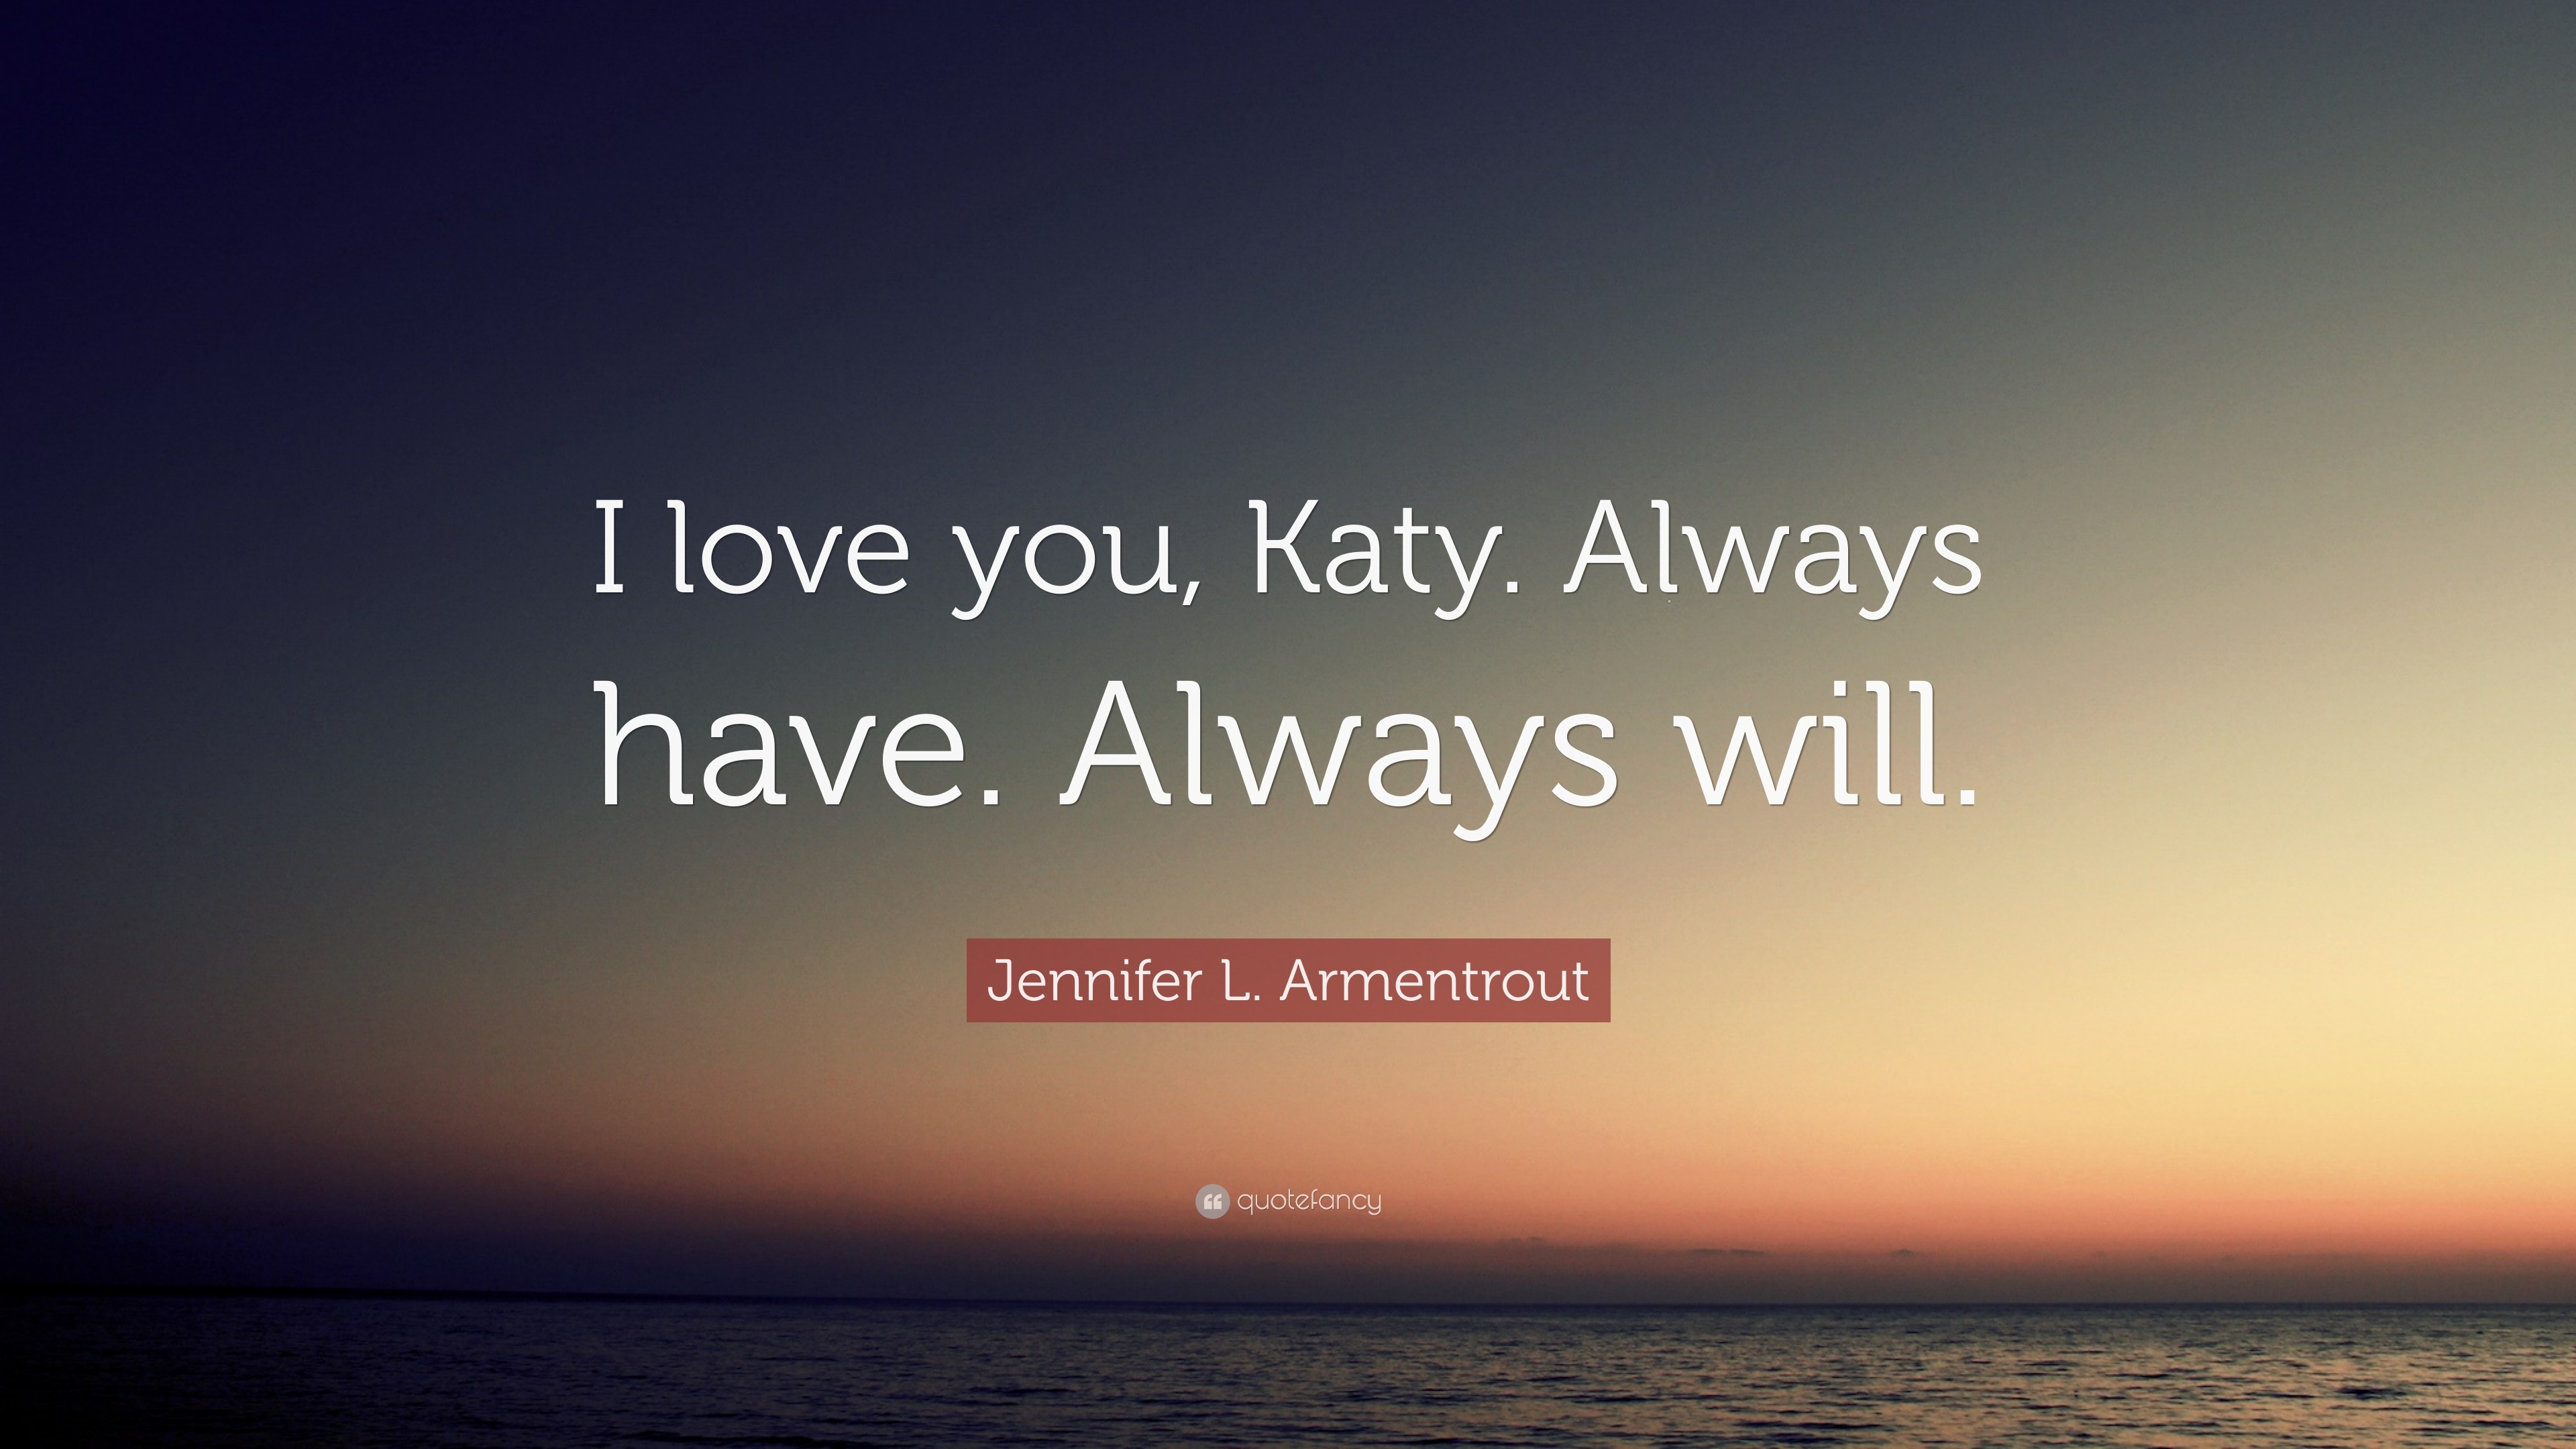 Jennifer L Armentrout Quote “I love you Katy Always have